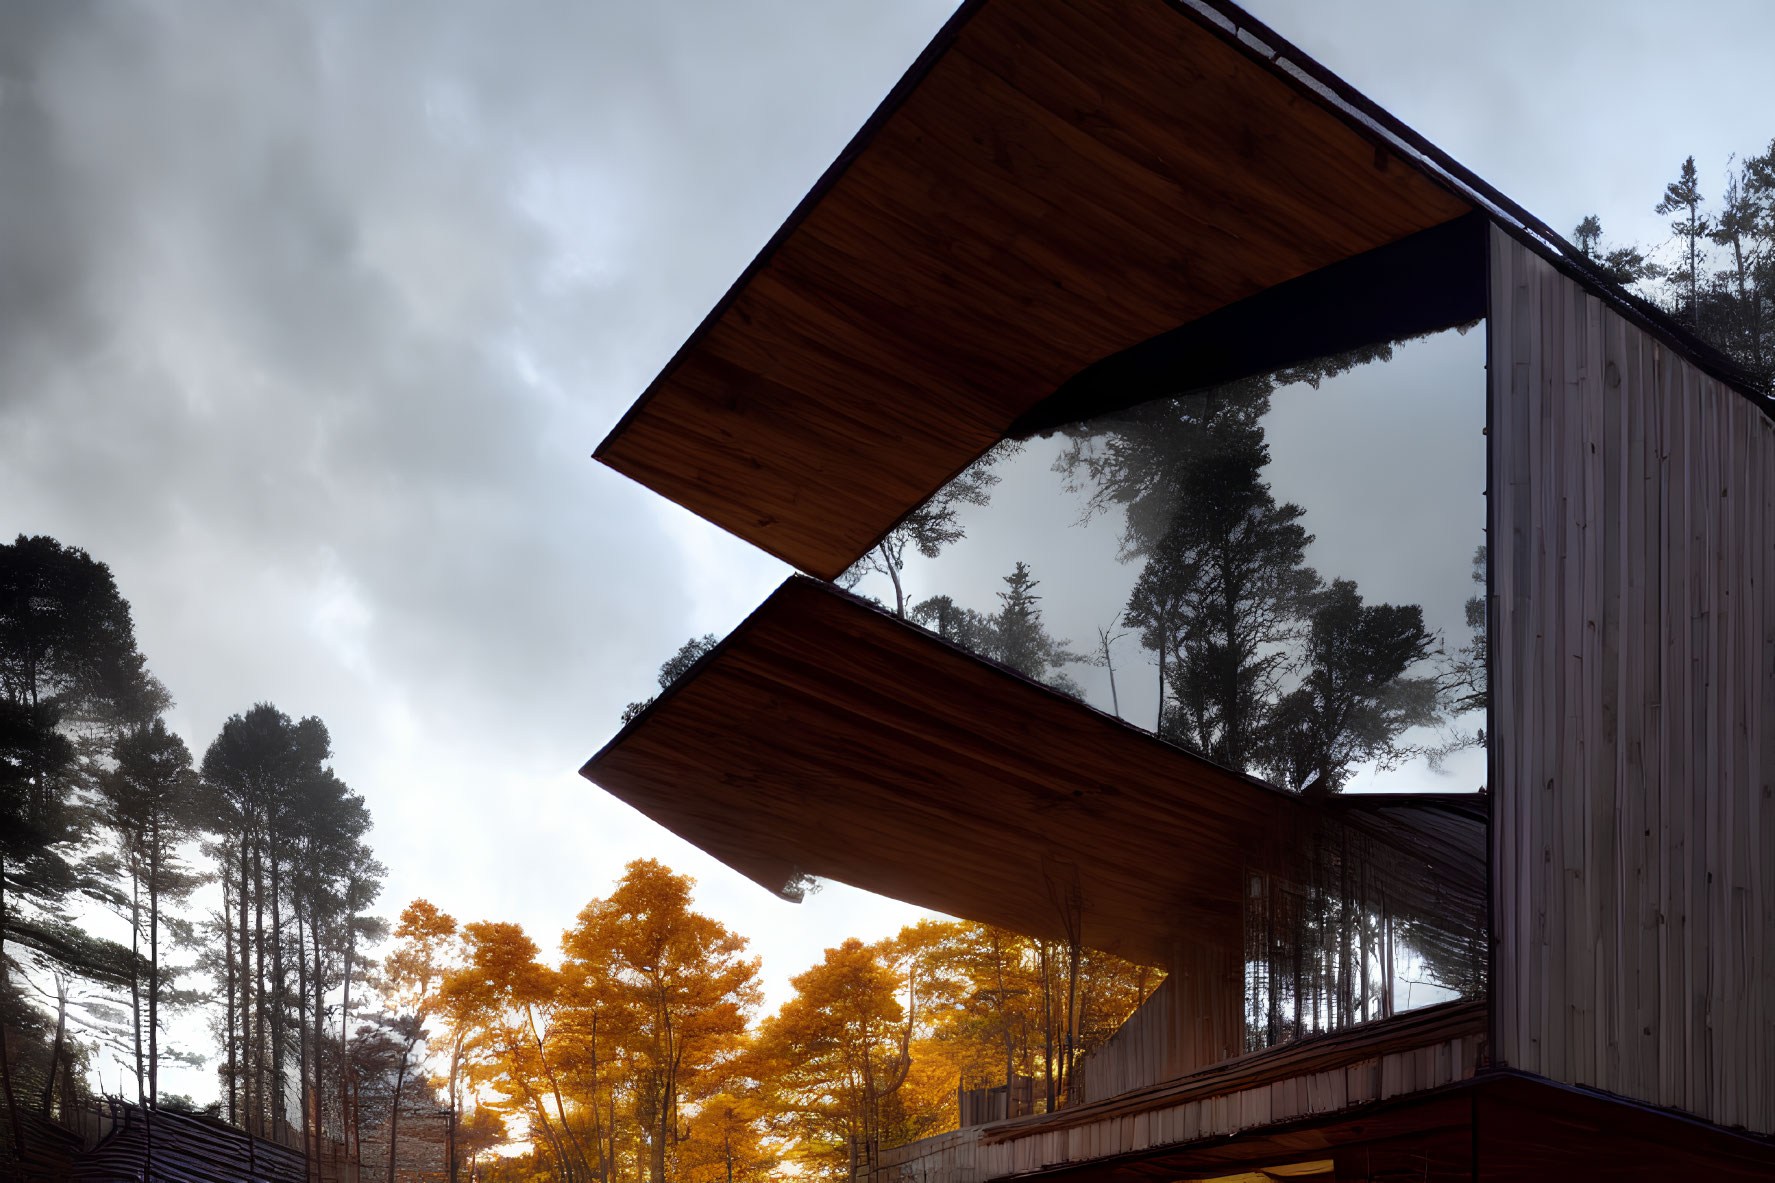 Modern building detail with wooden elements against misty autumn forest.